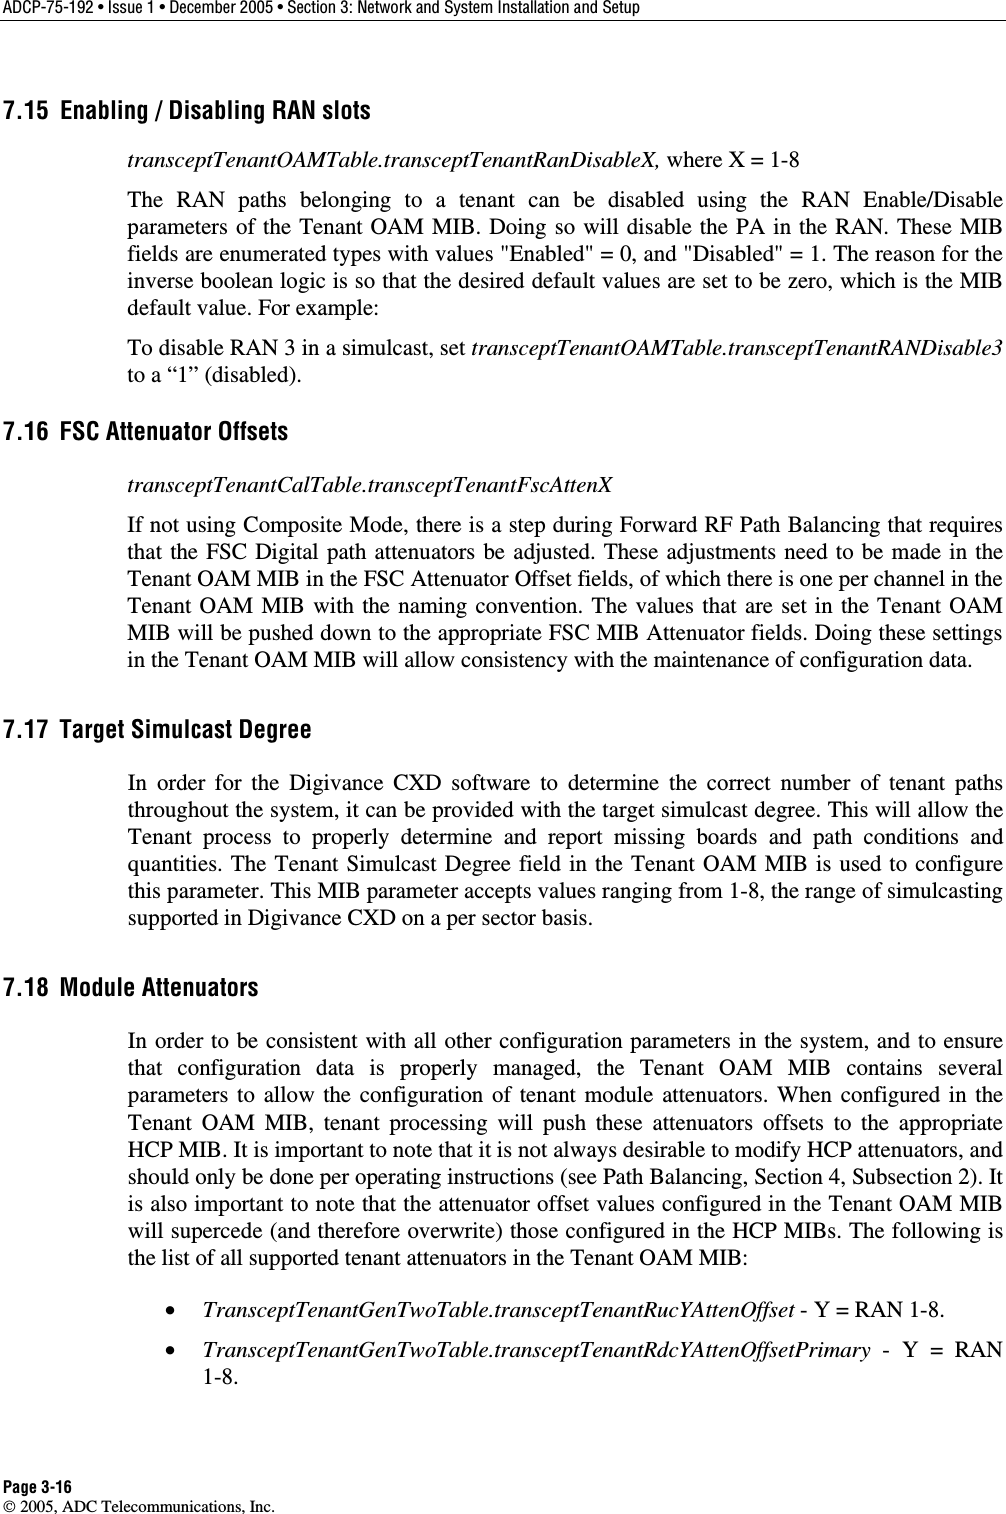 ADCP-75-192 • Issue 1 • December 2005 • Section 3: Network and System Installation and Setup Page 3-16  2005, ADC Telecommunications, Inc. 7.15  Enabling / Disabling RAN slots transceptTenantOAMTable.transceptTenantRanDisableX, where X = 1-8 The RAN paths belonging to a tenant can be disabled using the RAN Enable/Disable parameters of the Tenant OAM MIB. Doing so will disable the PA in the RAN. These MIB fields are enumerated types with values &quot;Enabled&quot; = 0, and &quot;Disabled&quot; = 1. The reason for the inverse boolean logic is so that the desired default values are set to be zero, which is the MIB default value. For example: To disable RAN 3 in a simulcast, set transceptTenantOAMTable.transceptTenantRANDisable3 to a “1” (disabled). 7.16  FSC Attenuator Offsets transceptTenantCalTable.transceptTenantFscAttenX If not using Composite Mode, there is a step during Forward RF Path Balancing that requires that the FSC Digital path attenuators be adjusted. These adjustments need to be made in the Tenant OAM MIB in the FSC Attenuator Offset fields, of which there is one per channel in the Tenant OAM MIB with the naming convention. The values that are set in the Tenant OAM MIB will be pushed down to the appropriate FSC MIB Attenuator fields. Doing these settings in the Tenant OAM MIB will allow consistency with the maintenance of configuration data.  7.17  Target Simulcast Degree In order for the Digivance CXD software to determine the correct number of tenant paths throughout the system, it can be provided with the target simulcast degree. This will allow the Tenant process to properly determine and report missing boards and path conditions and quantities. The Tenant Simulcast Degree field in the Tenant OAM MIB is used to configure this parameter. This MIB parameter accepts values ranging from 1-8, the range of simulcasting supported in Digivance CXD on a per sector basis.  7.18 Module Attenuators In order to be consistent with all other configuration parameters in the system, and to ensure that configuration data is properly managed, the Tenant OAM MIB contains several parameters to allow the configuration of tenant module attenuators. When configured in the Tenant OAM MIB, tenant processing will push these attenuators offsets to the appropriate HCP MIB. It is important to note that it is not always desirable to modify HCP attenuators, and should only be done per operating instructions (see Path Balancing, Section 4, Subsection 2). It is also important to note that the attenuator offset values configured in the Tenant OAM MIB will supercede (and therefore overwrite) those configured in the HCP MIBs. The following is the list of all supported tenant attenuators in the Tenant OAM MIB: •  TransceptTenantGenTwoTable.transceptTenantRucYAttenOffset - Y = RAN 1-8. •  TransceptTenantGenTwoTable.transceptTenantRdcYAttenOffsetPrimary - Y = RAN 1-8. 